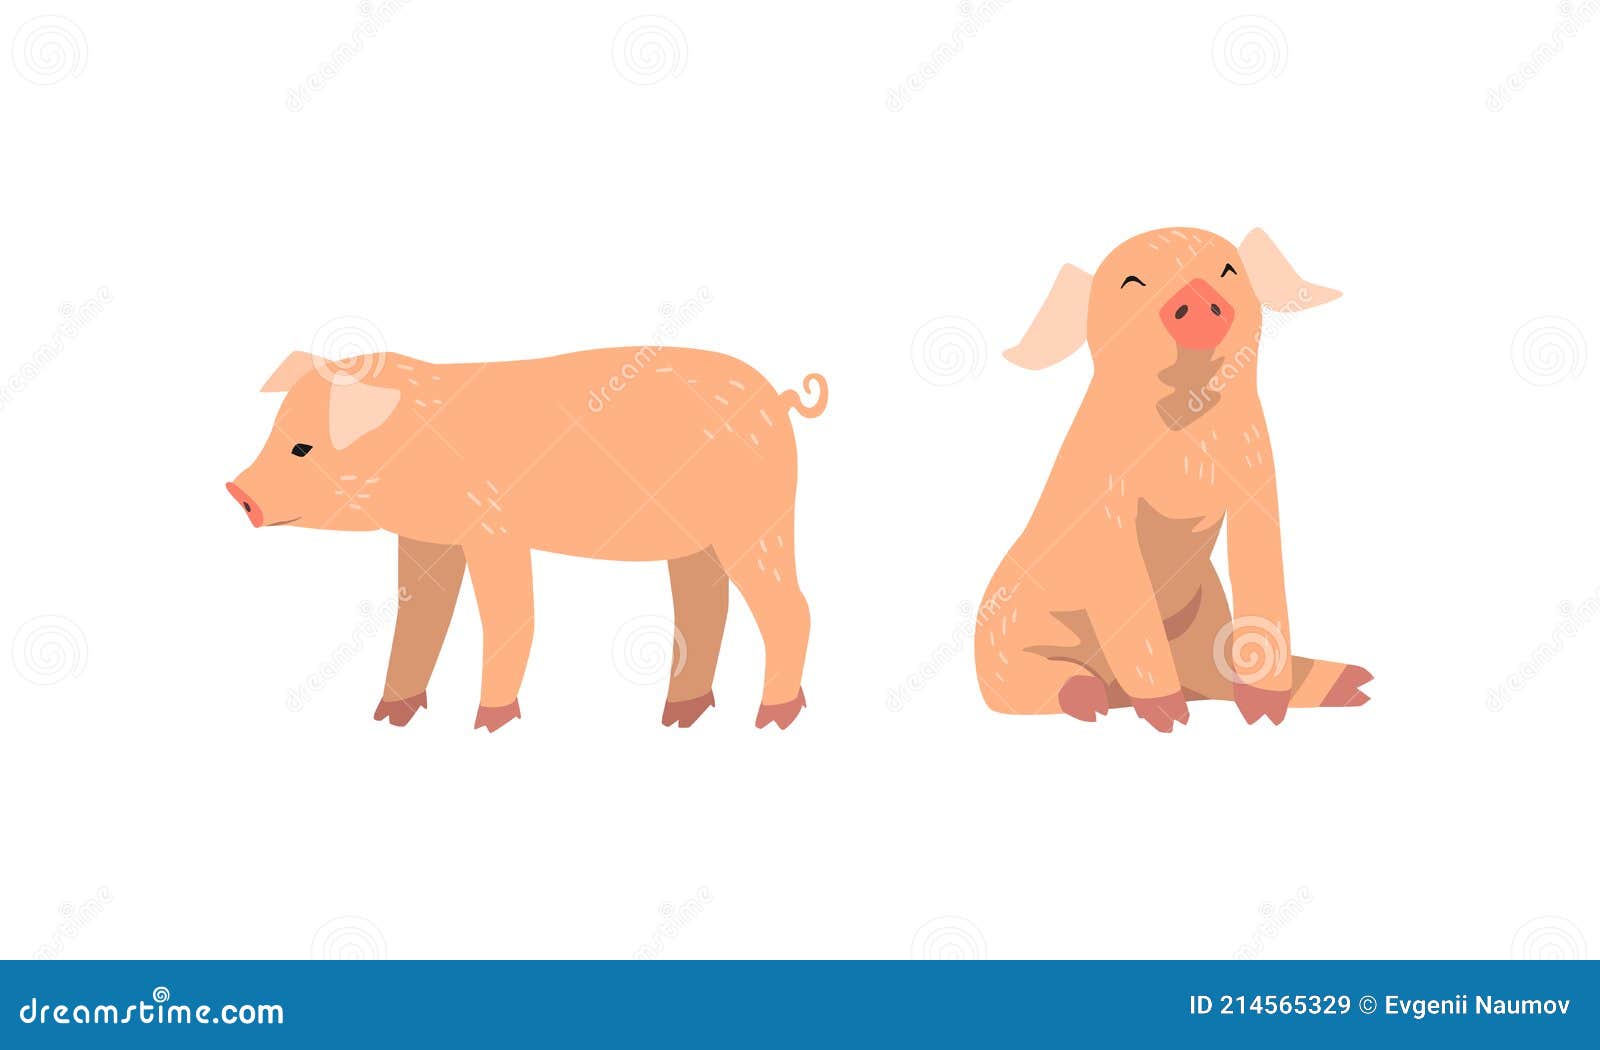 pinky pig as domestic animal with long snout and hoofed toes  set